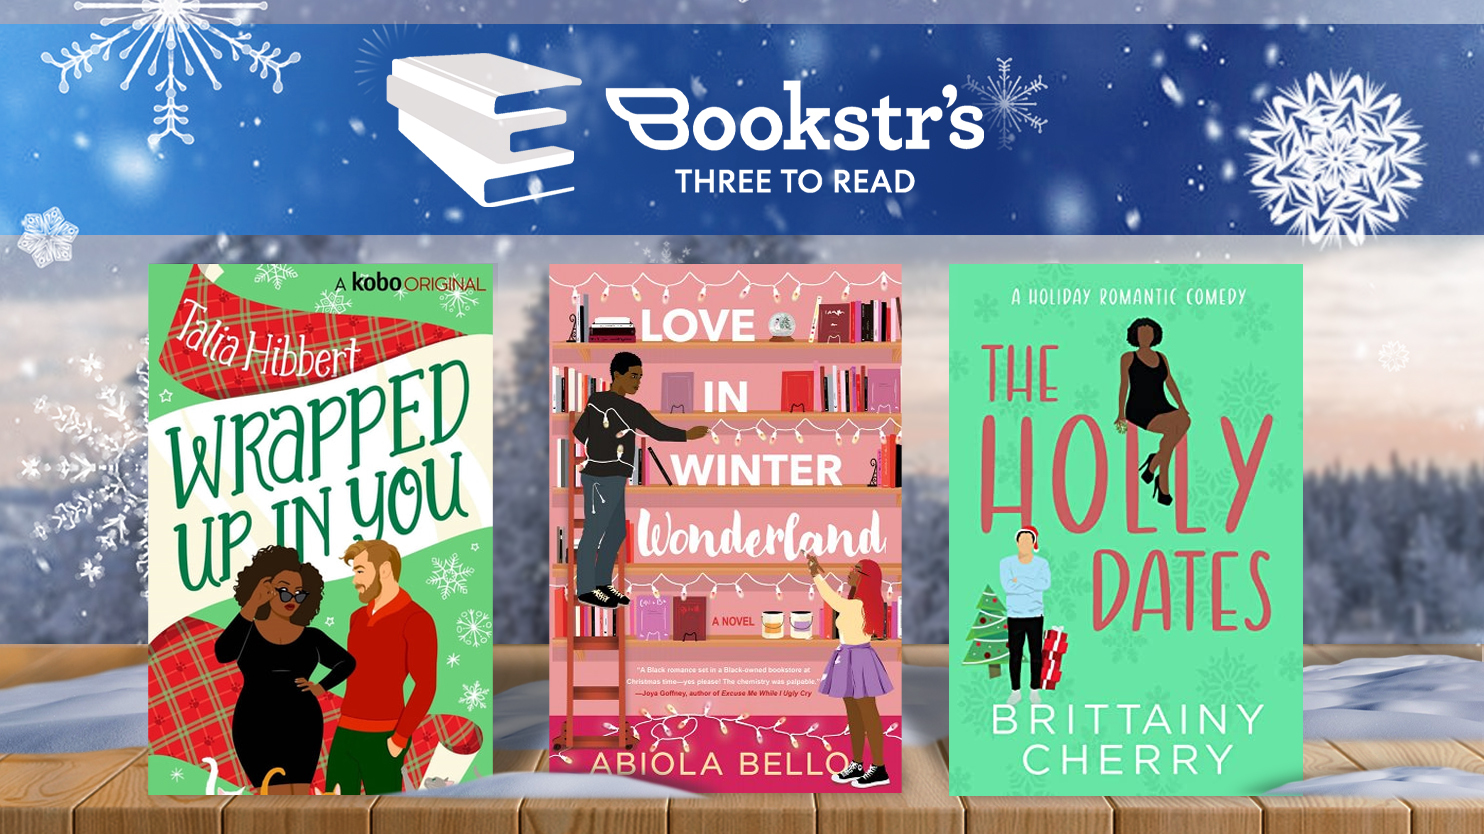 Book covers for "Wrapped Up In You" by Talia Hibbert, "Love in Winter Wonderland" by Abiola Bello, and "The Holly Dates" by Brittainy Cherry